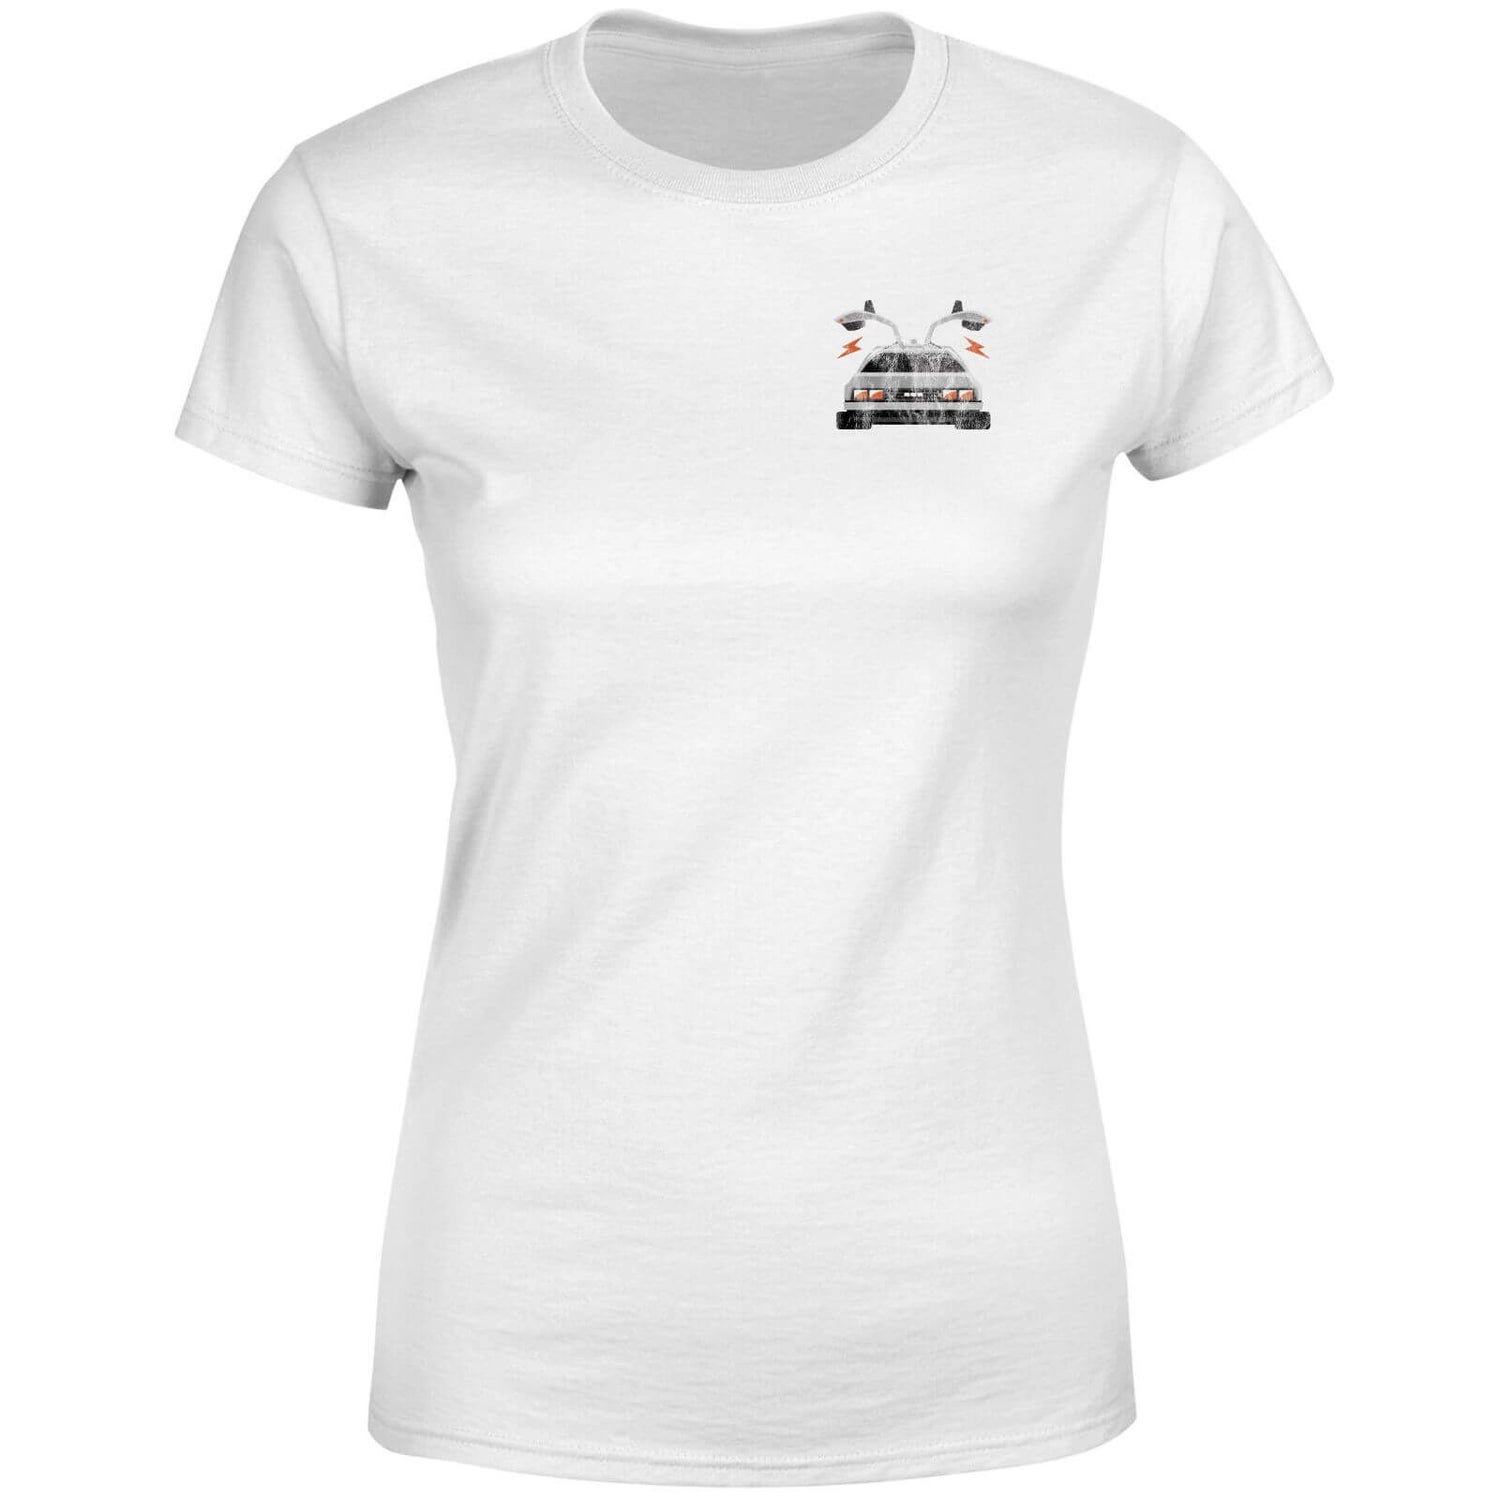 Back To The Future No Concept Of Time Women's T-Shirt - White